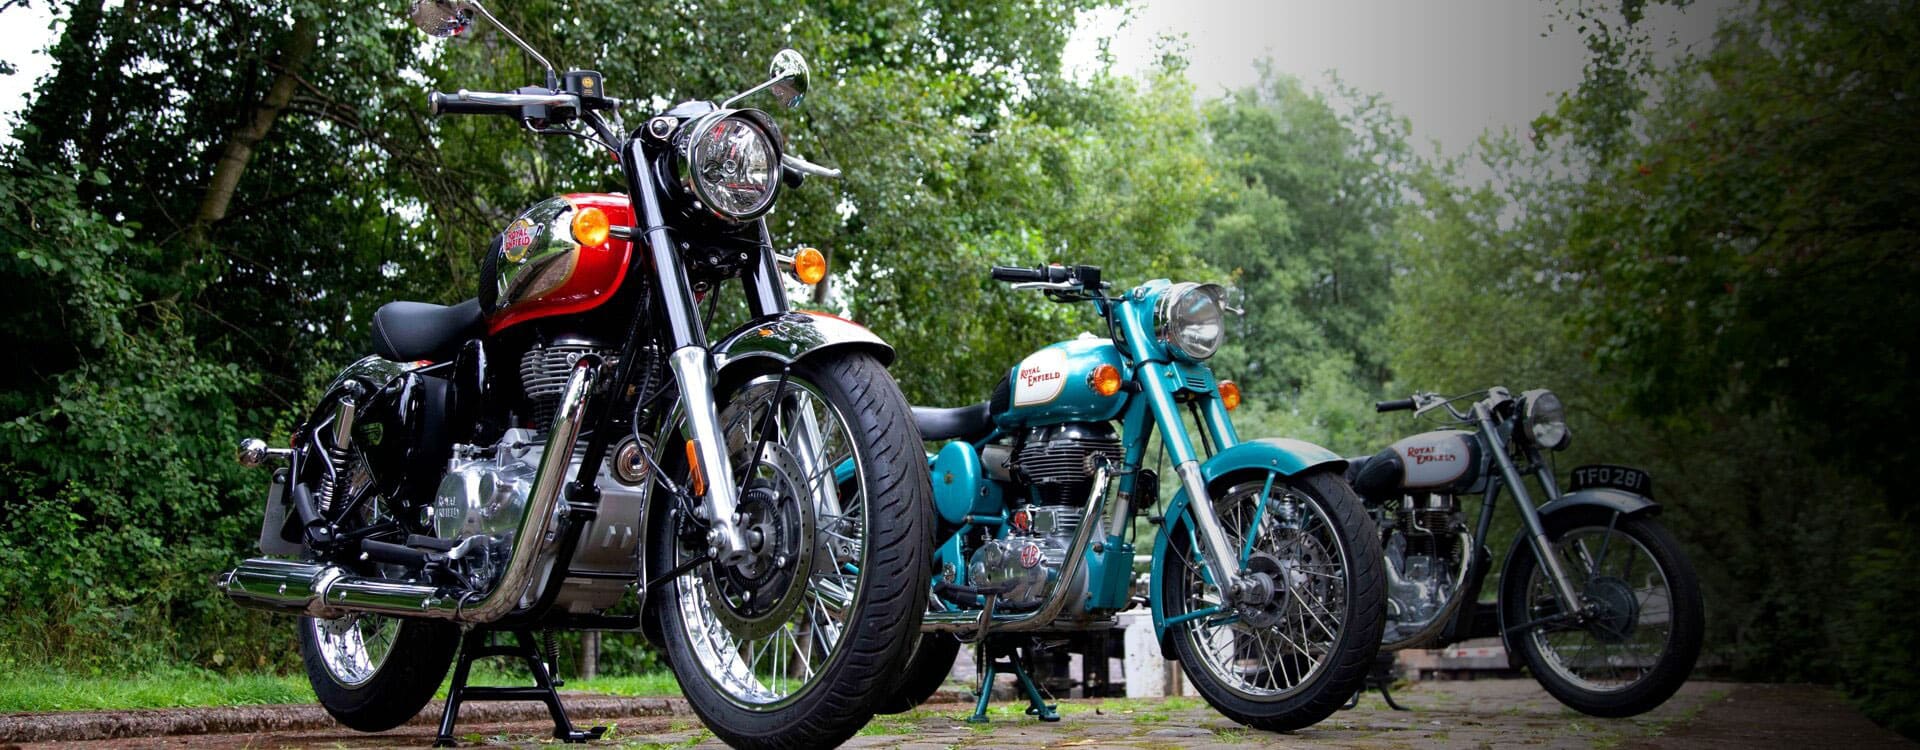 The Royal Enfield Classic 350 - possible the most loved motorcycle across the globe.